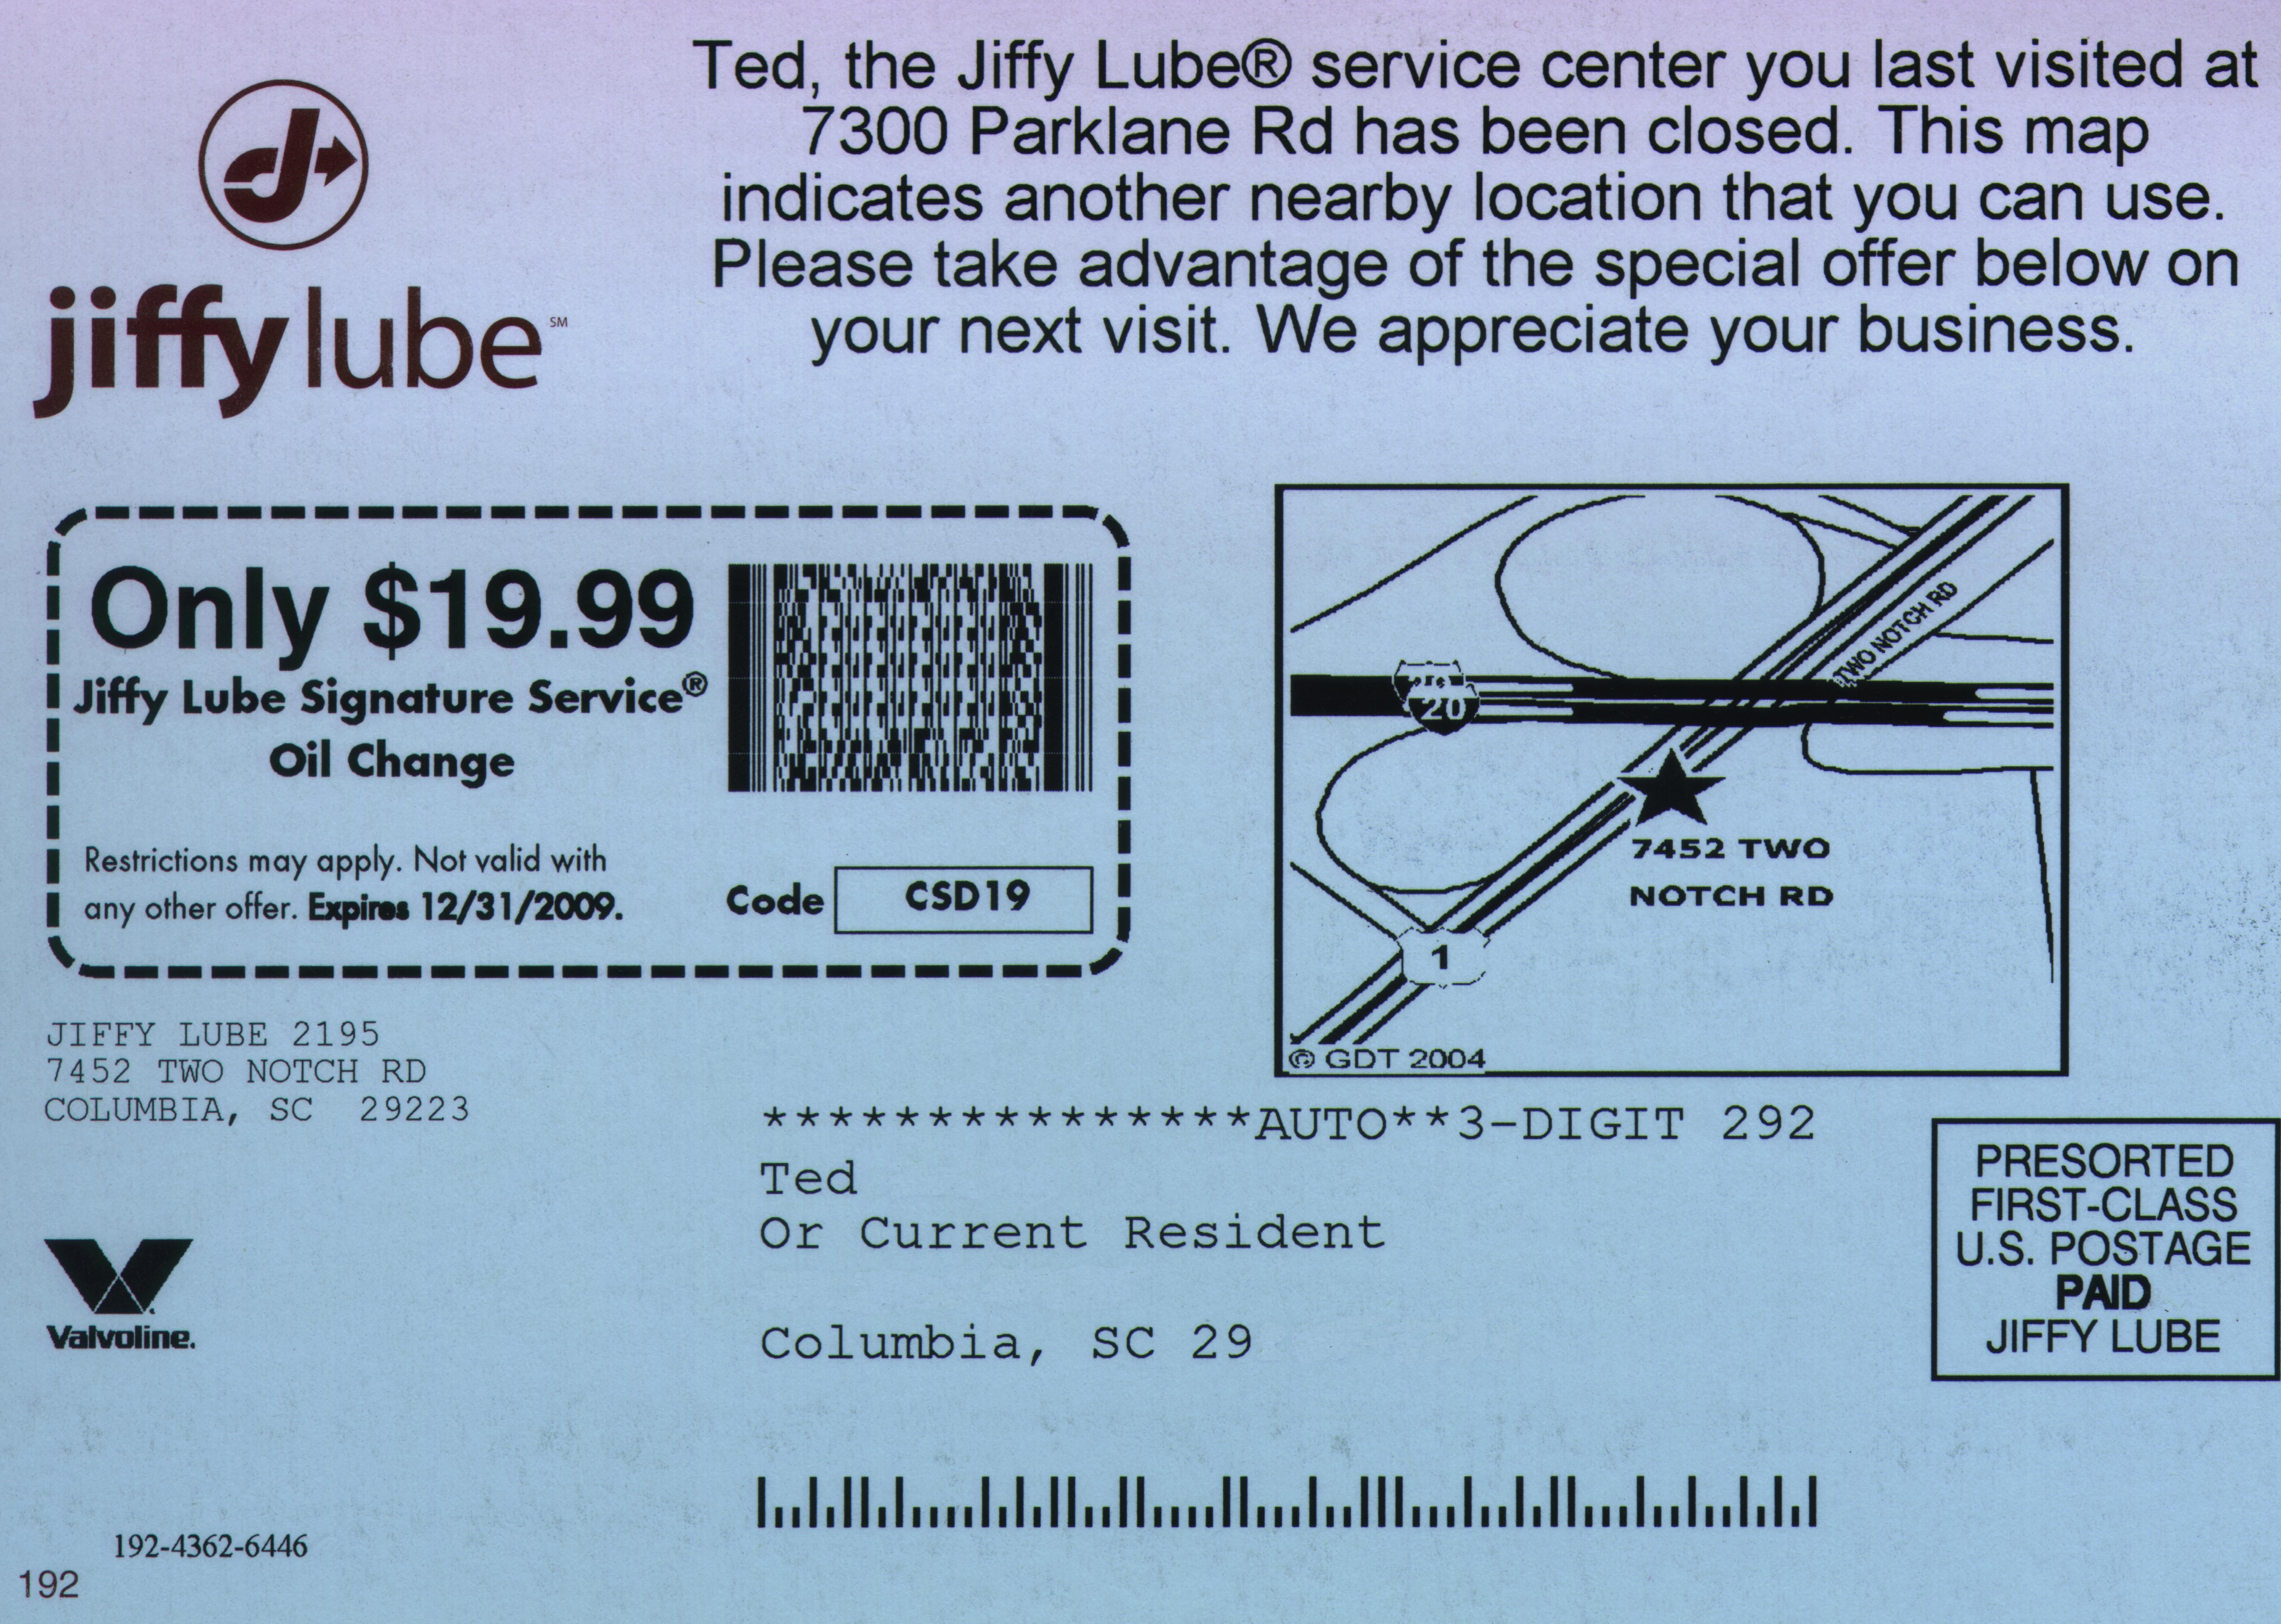 What types of oil changes are available at Jiffy Lube?